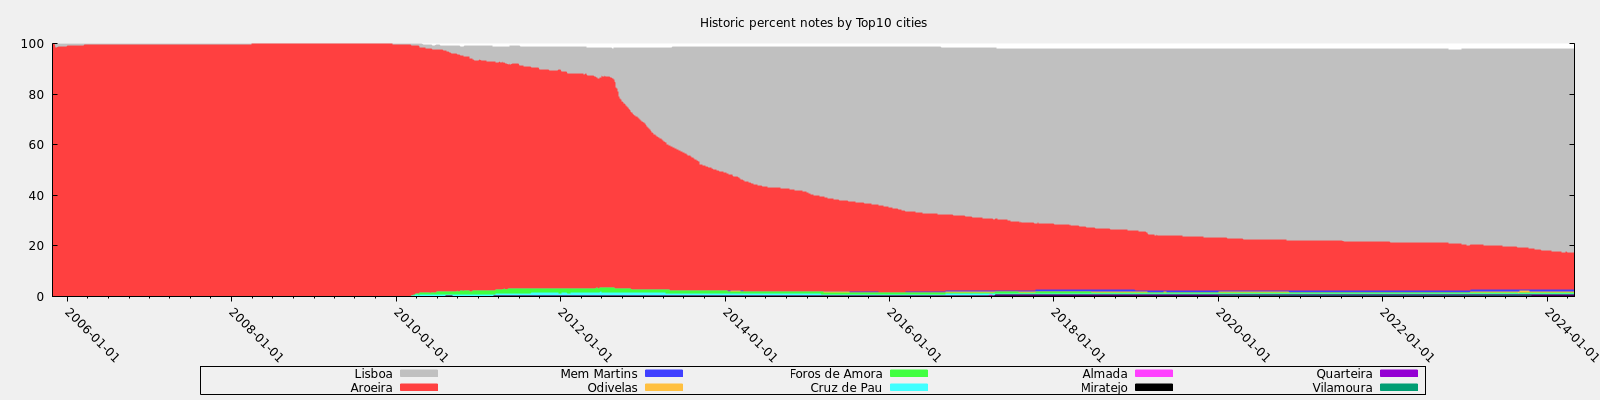 Historic percent notes by Top10 cities